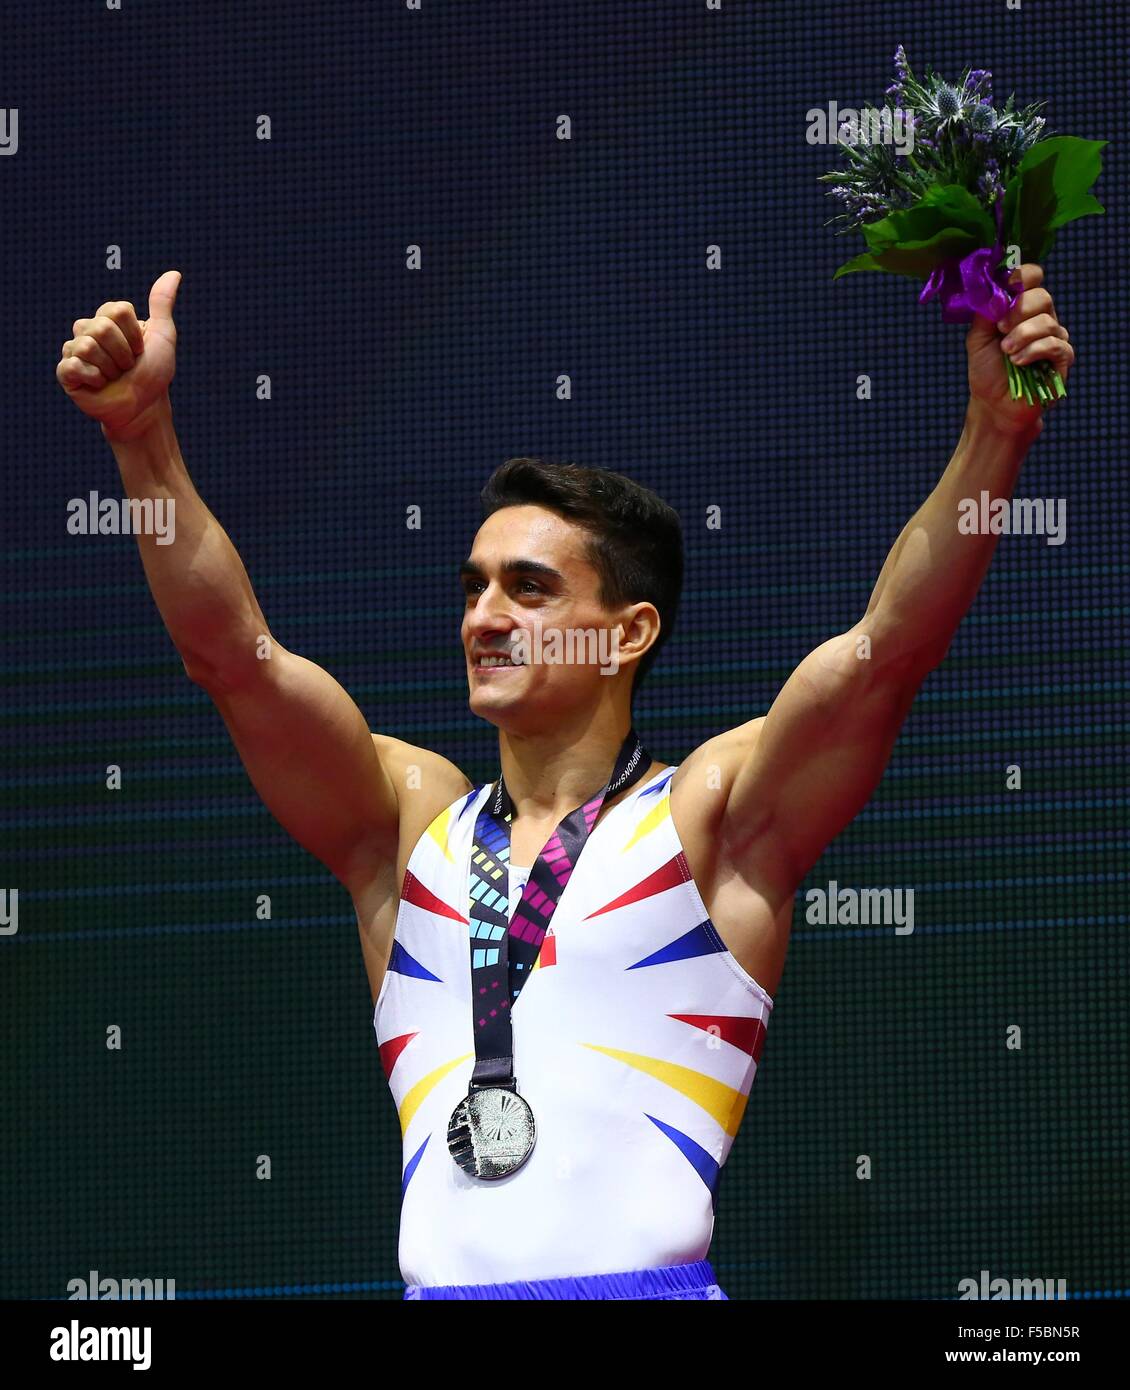 Glasgow, Great Britain. 1st Nov, 2015. Marian Dragulescu from Romania reacts on the podium after the men's Vault Final at the 46th World Artistic Gymnastics Championships at the SSE Hydro Arena in Glasgow, Scotland, Great Britain, on Nov. 1, 2015. Dragulescu won the silver medal. © Gong Bing/Xinhua/Alamy Live News Stock Photo